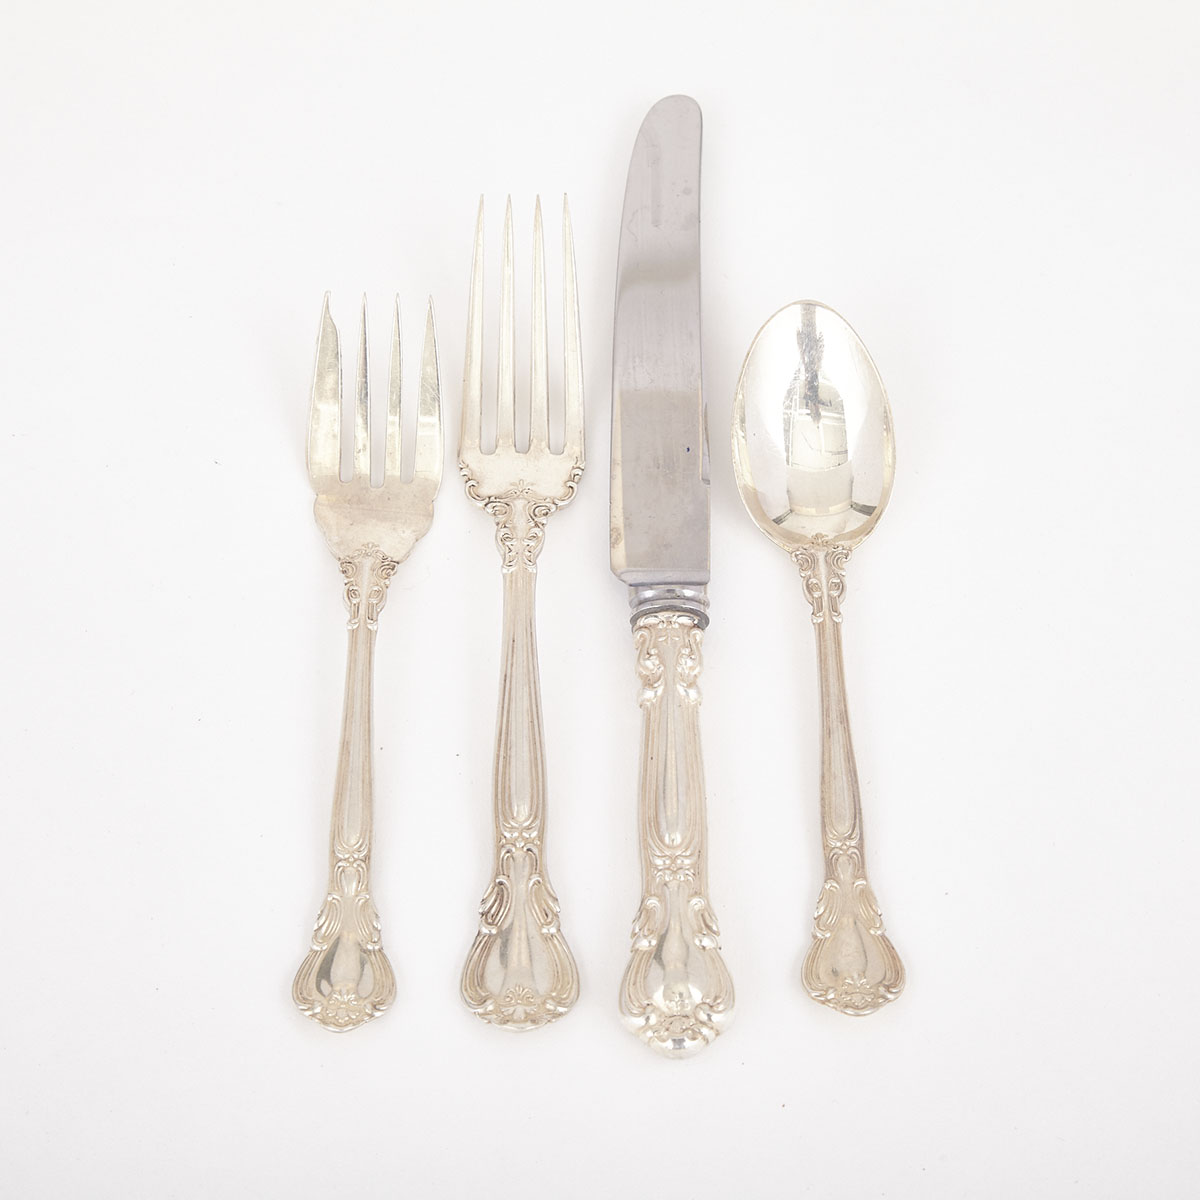 Canadian Silver ‘Chantilly’ Pattern Flatware Service, Henry Birks & Sons, Montreal, Que., 20th century 